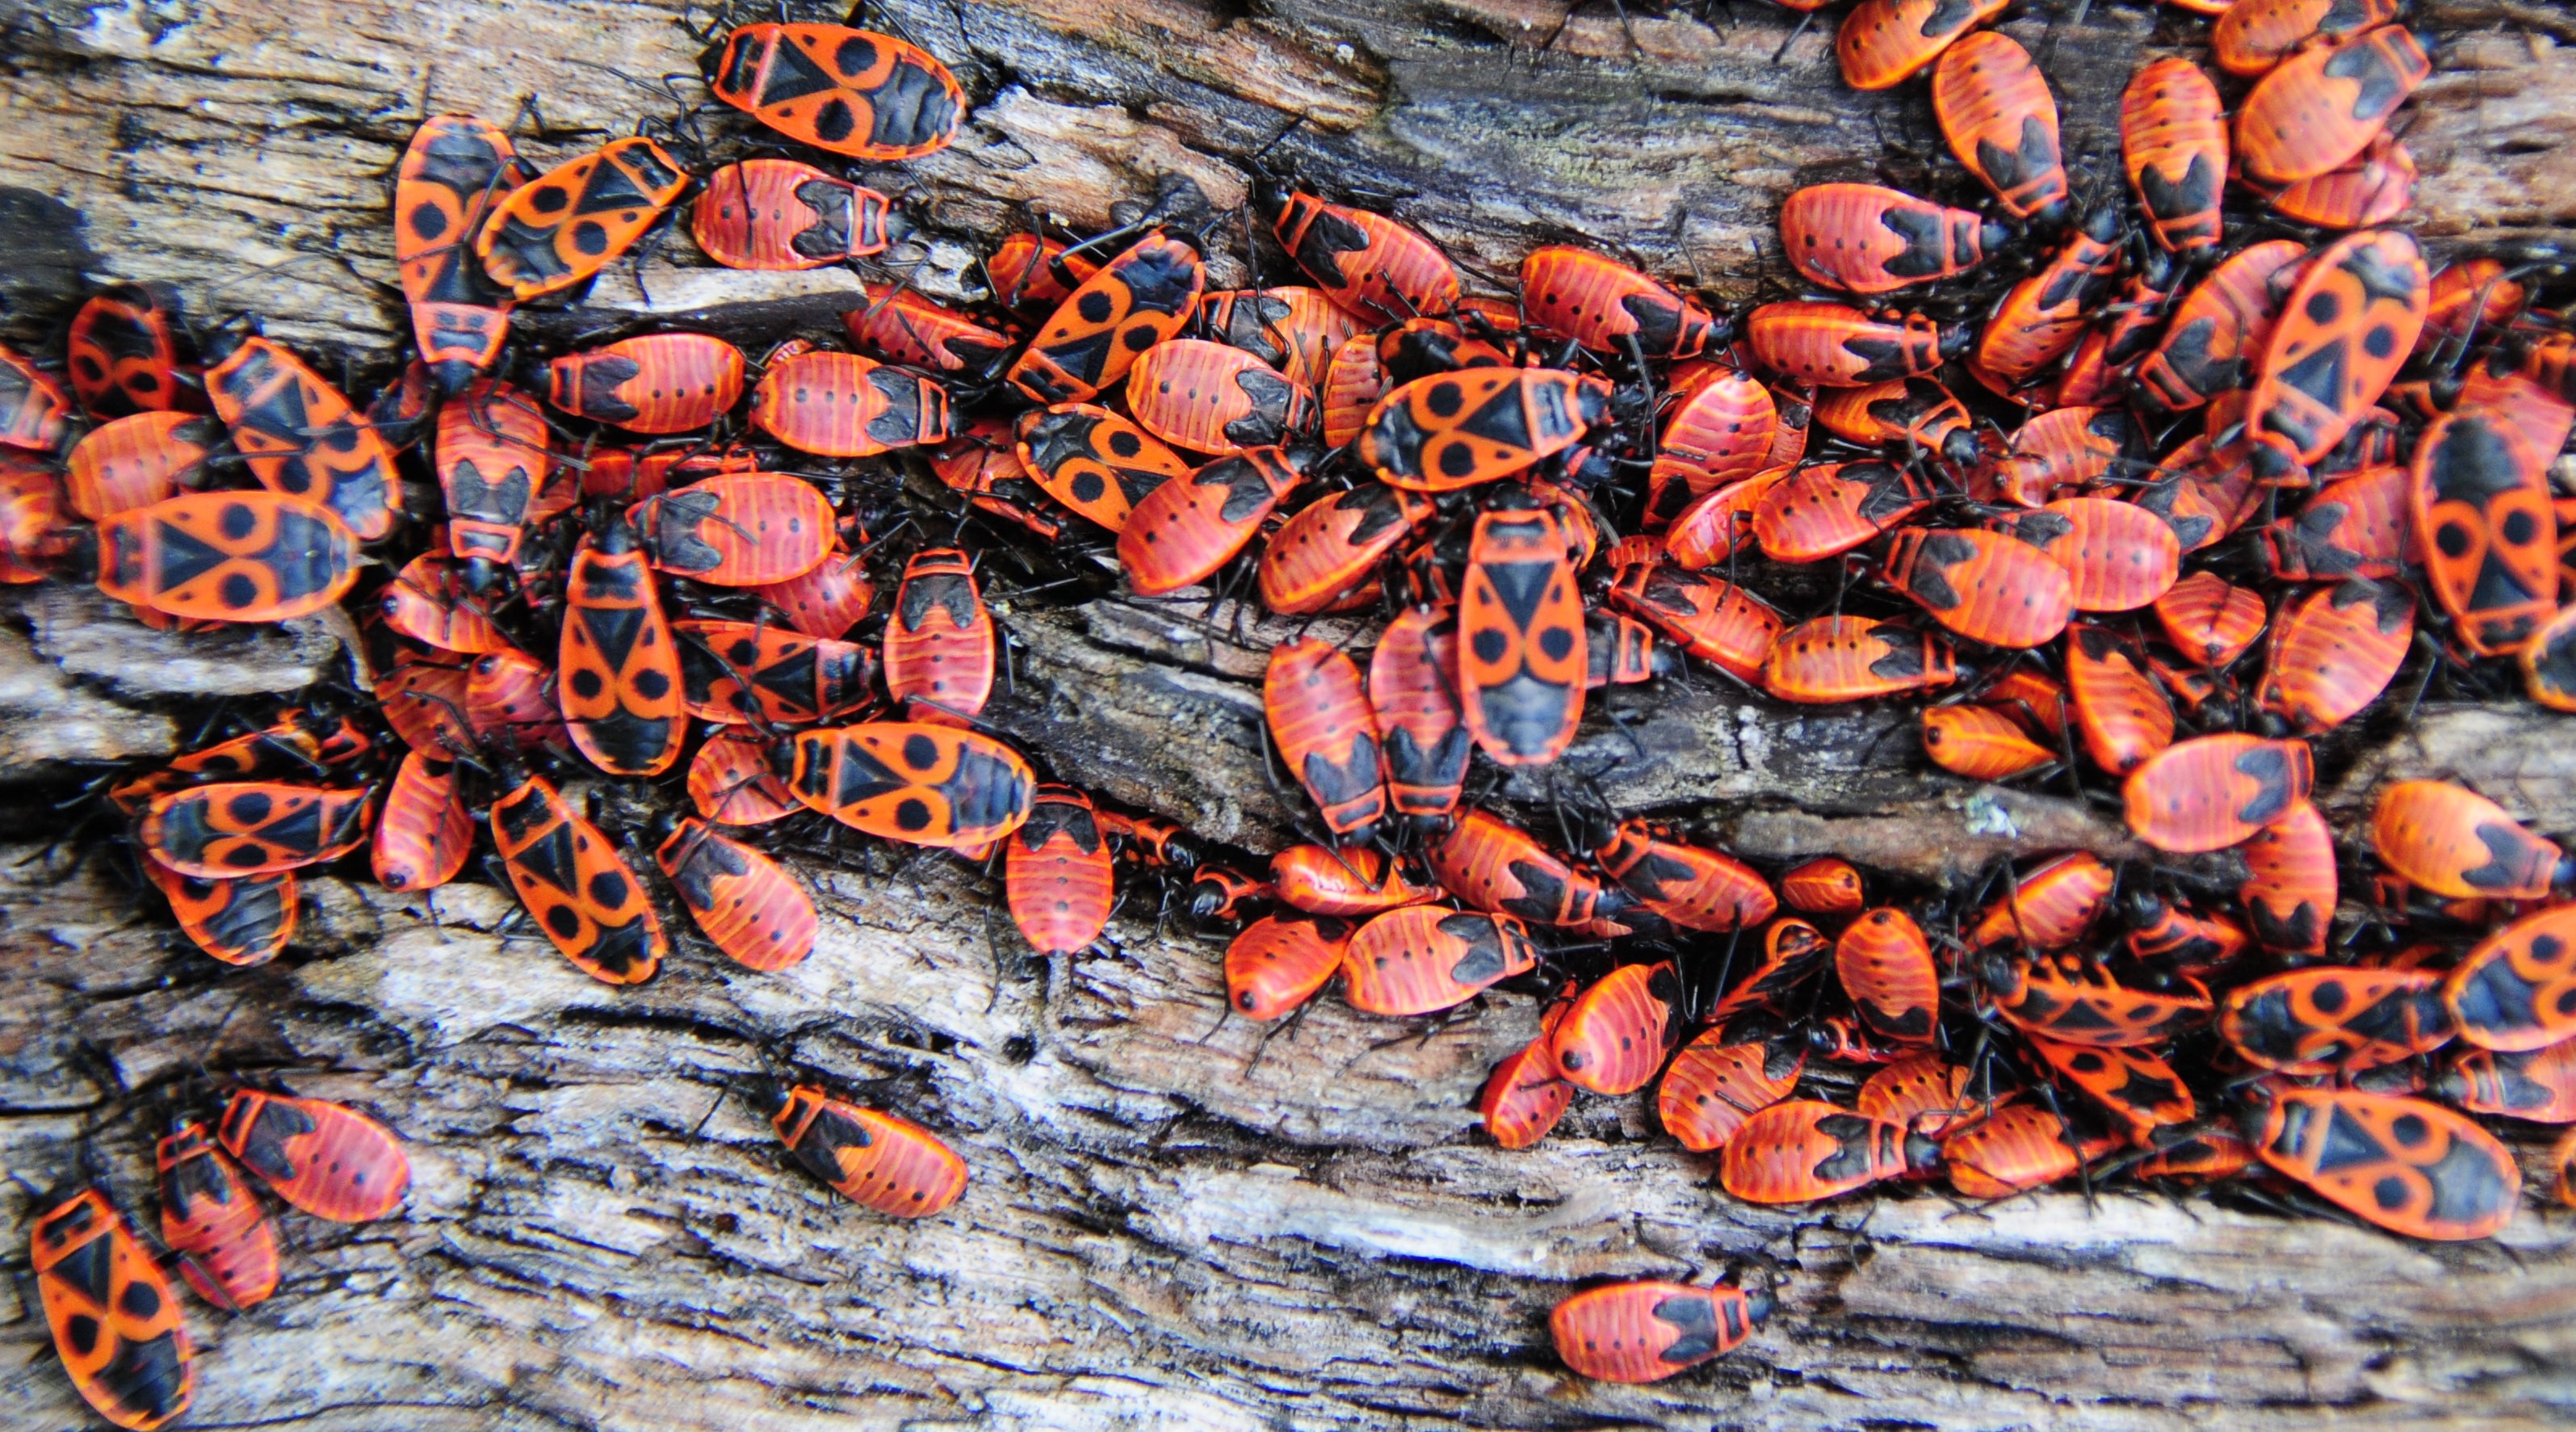 Fig. 5. Aggregation of various red firebug life stages on a tree trunk.